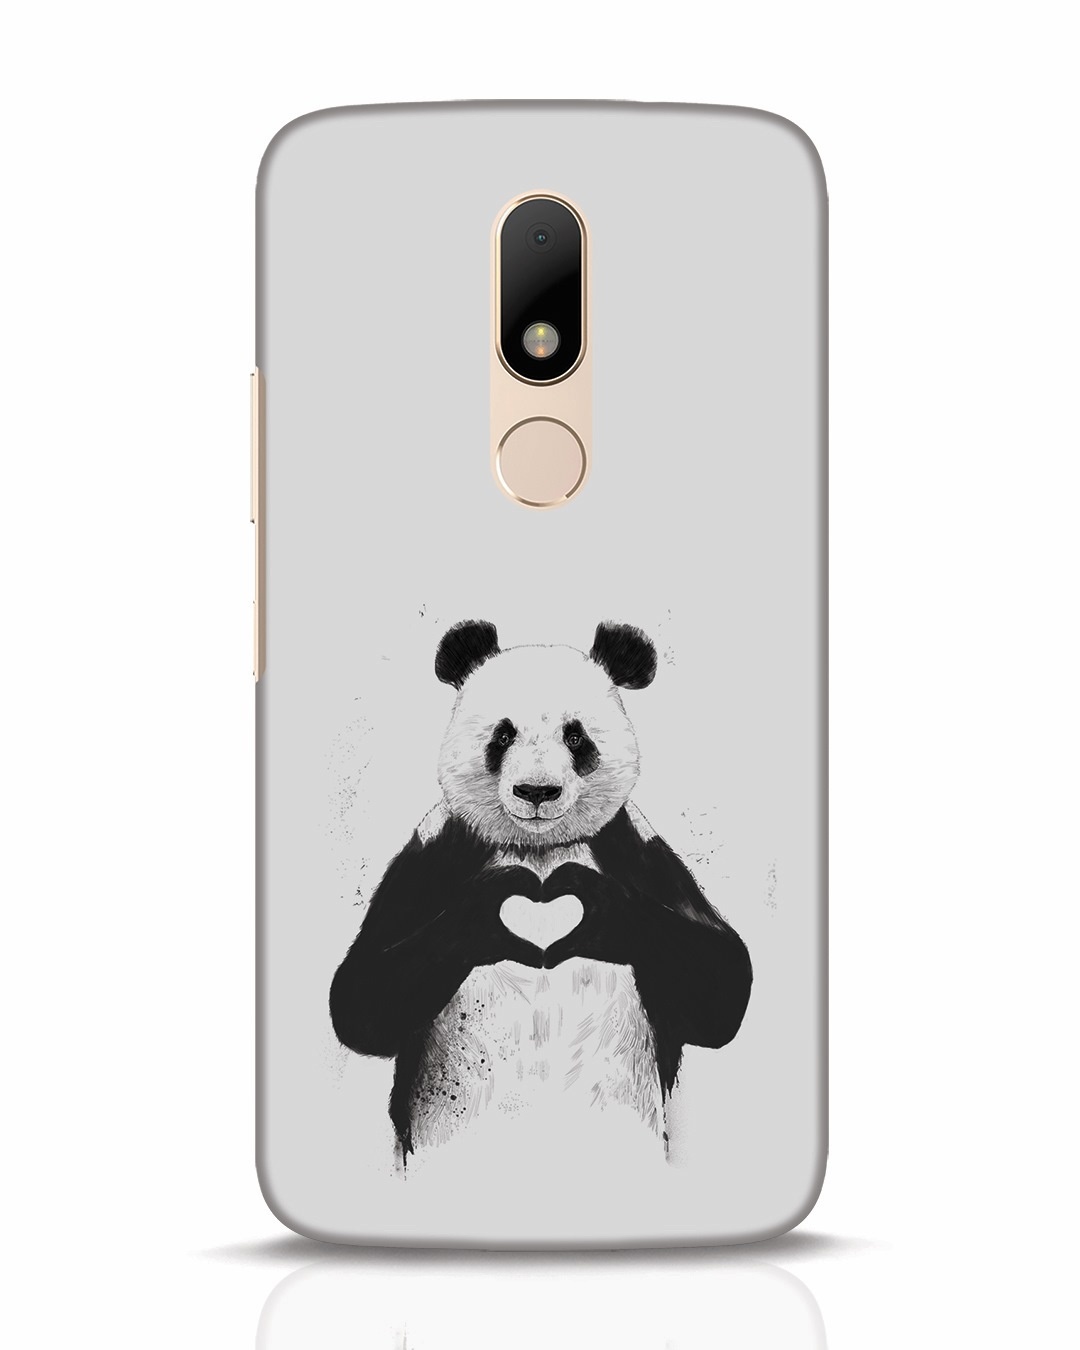 All You Need Is Love Moto M Mobile Cover Moto M Mobile Covers Bewakoof.com